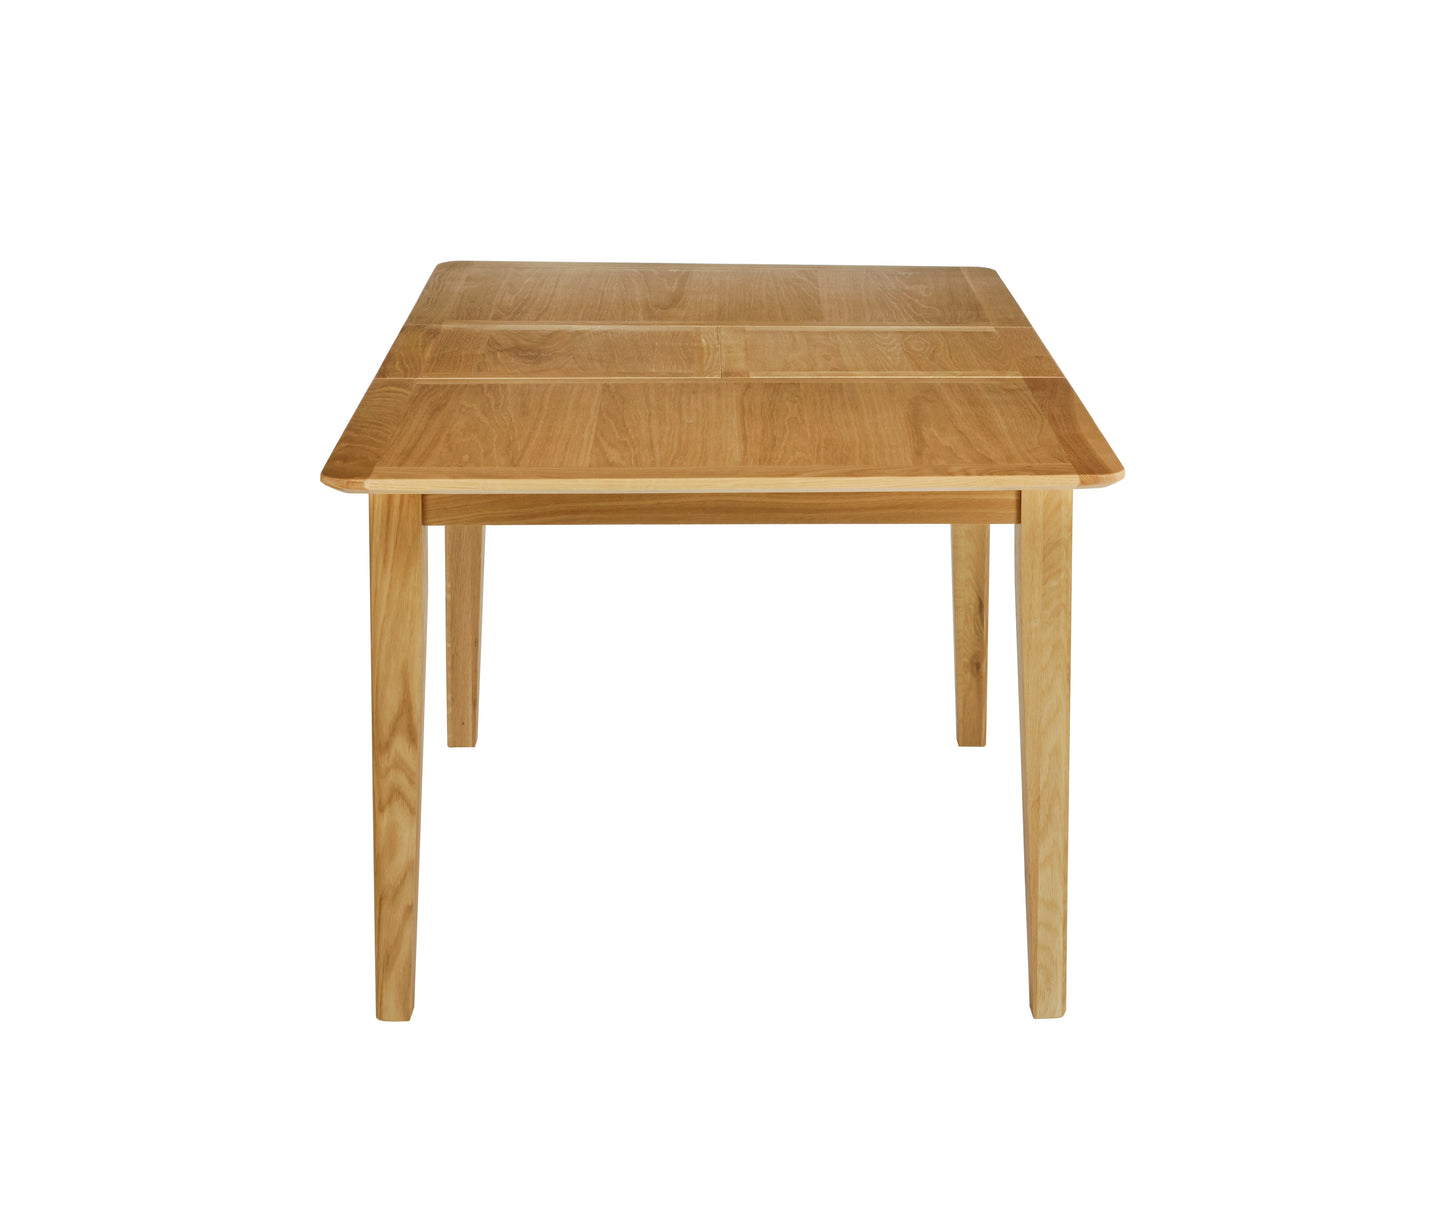 The Bromley Collection - Compact Extending Dining Table